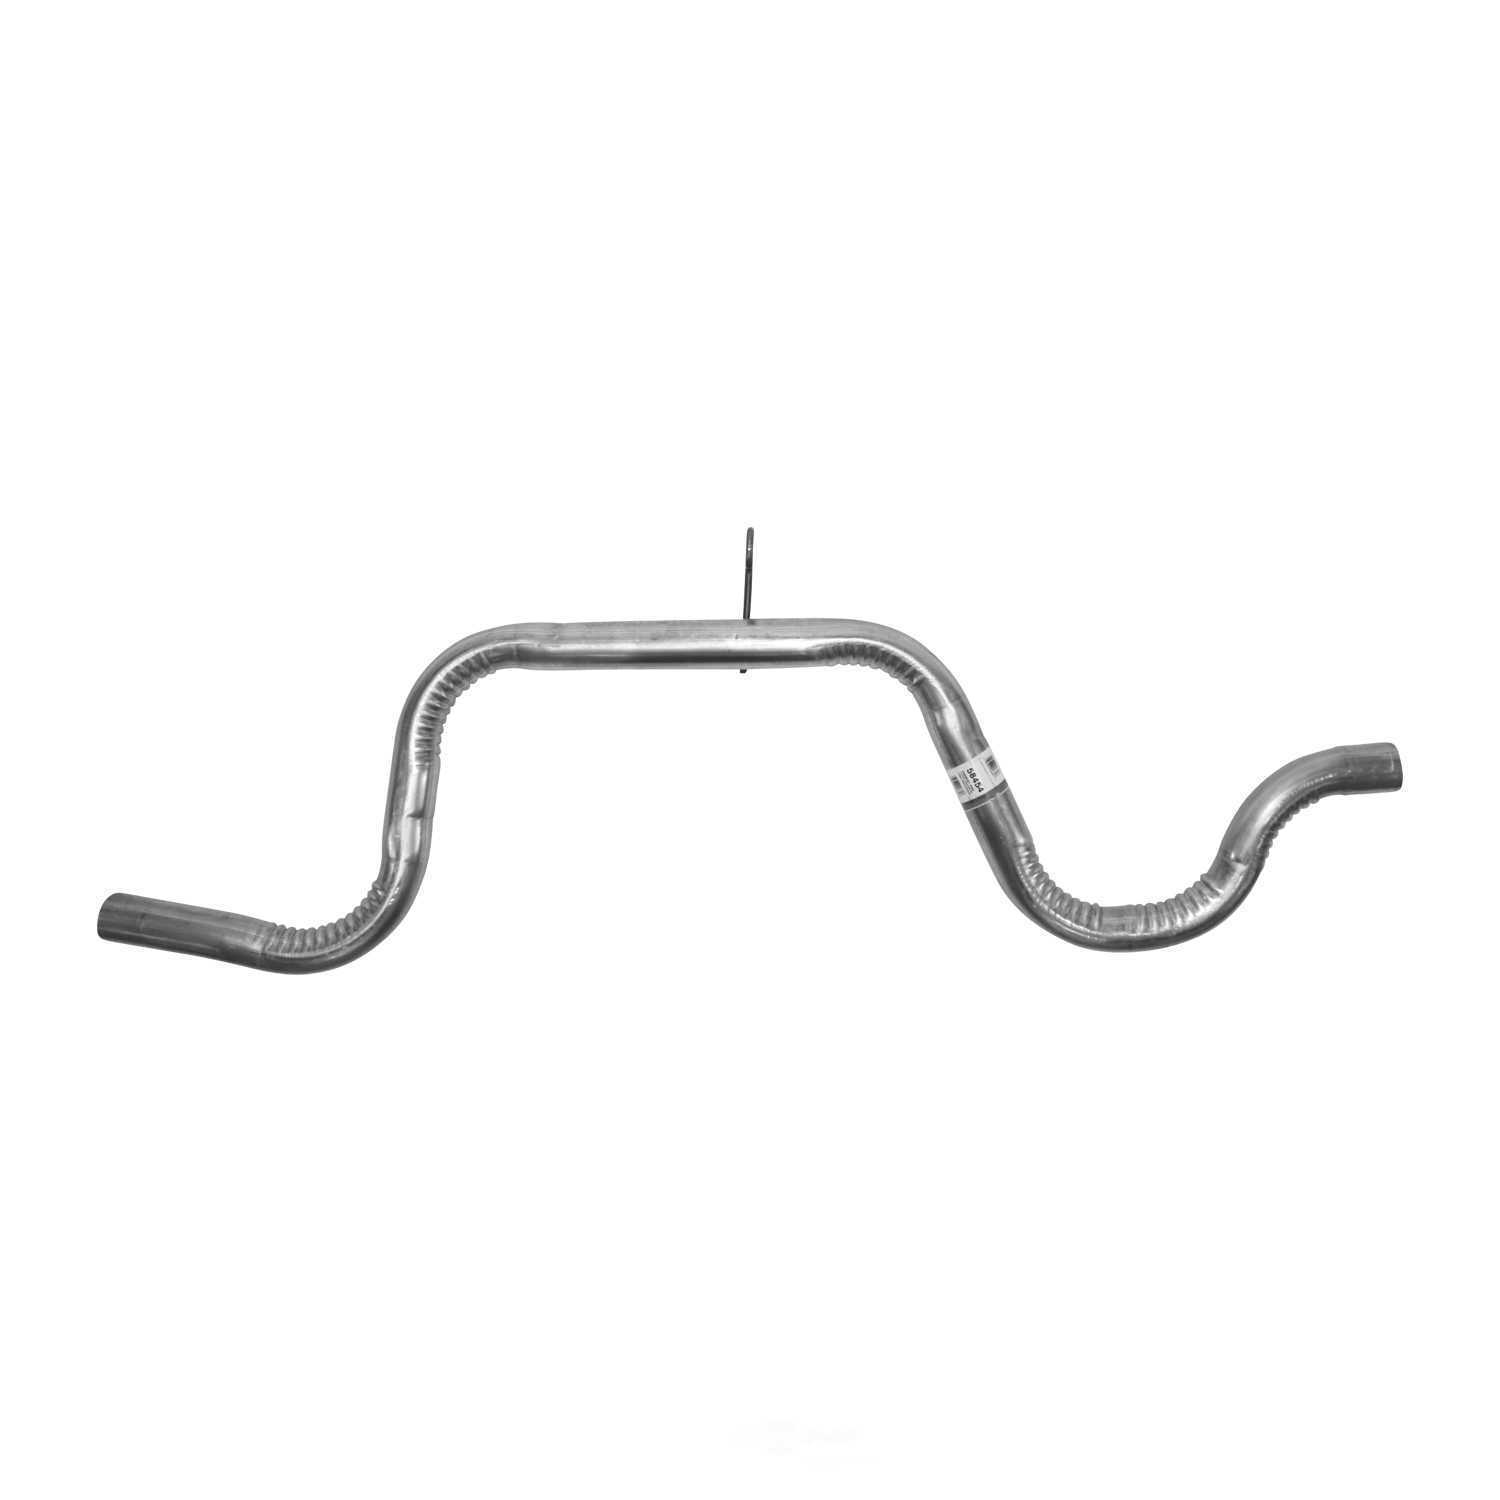 Exhaust Pipe-FI AP Exhaust 58454